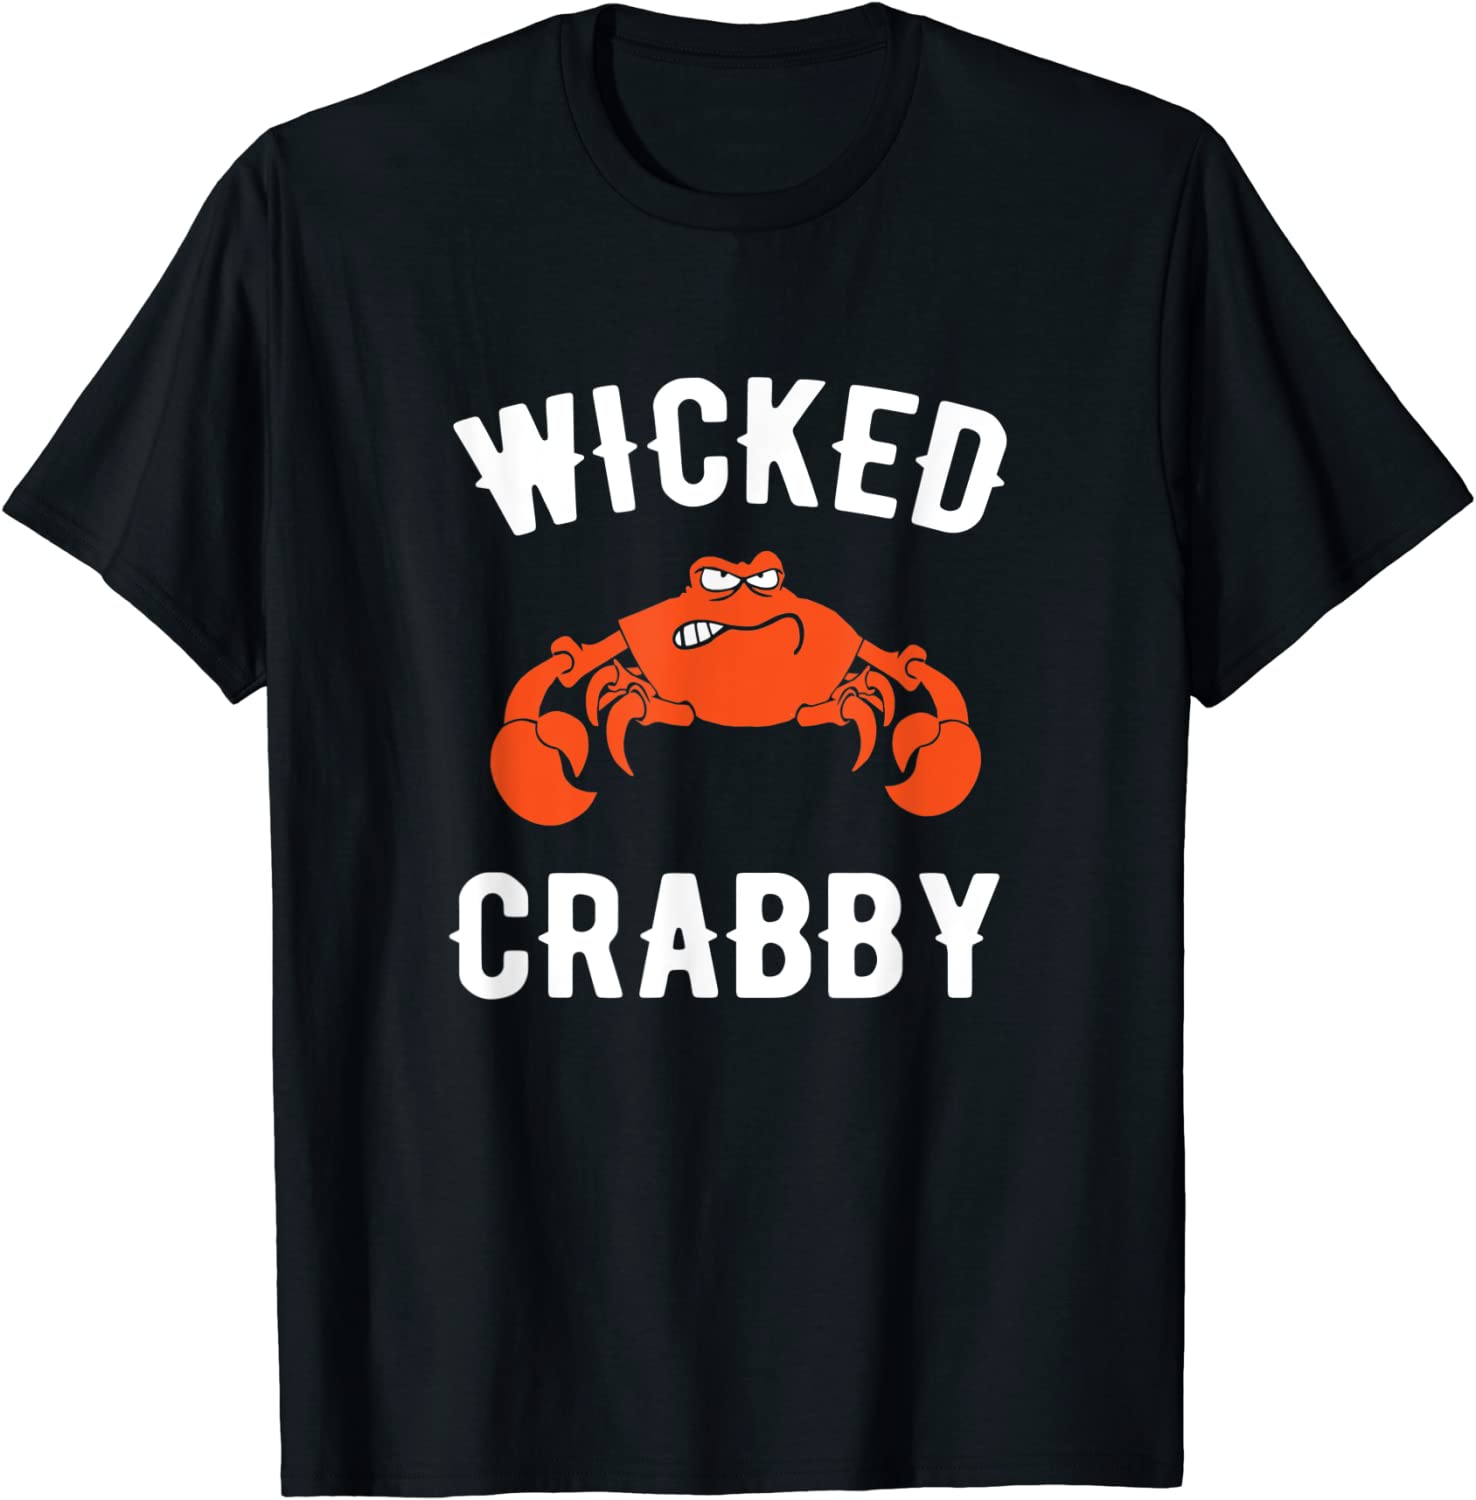 wicked crabby t-shirt